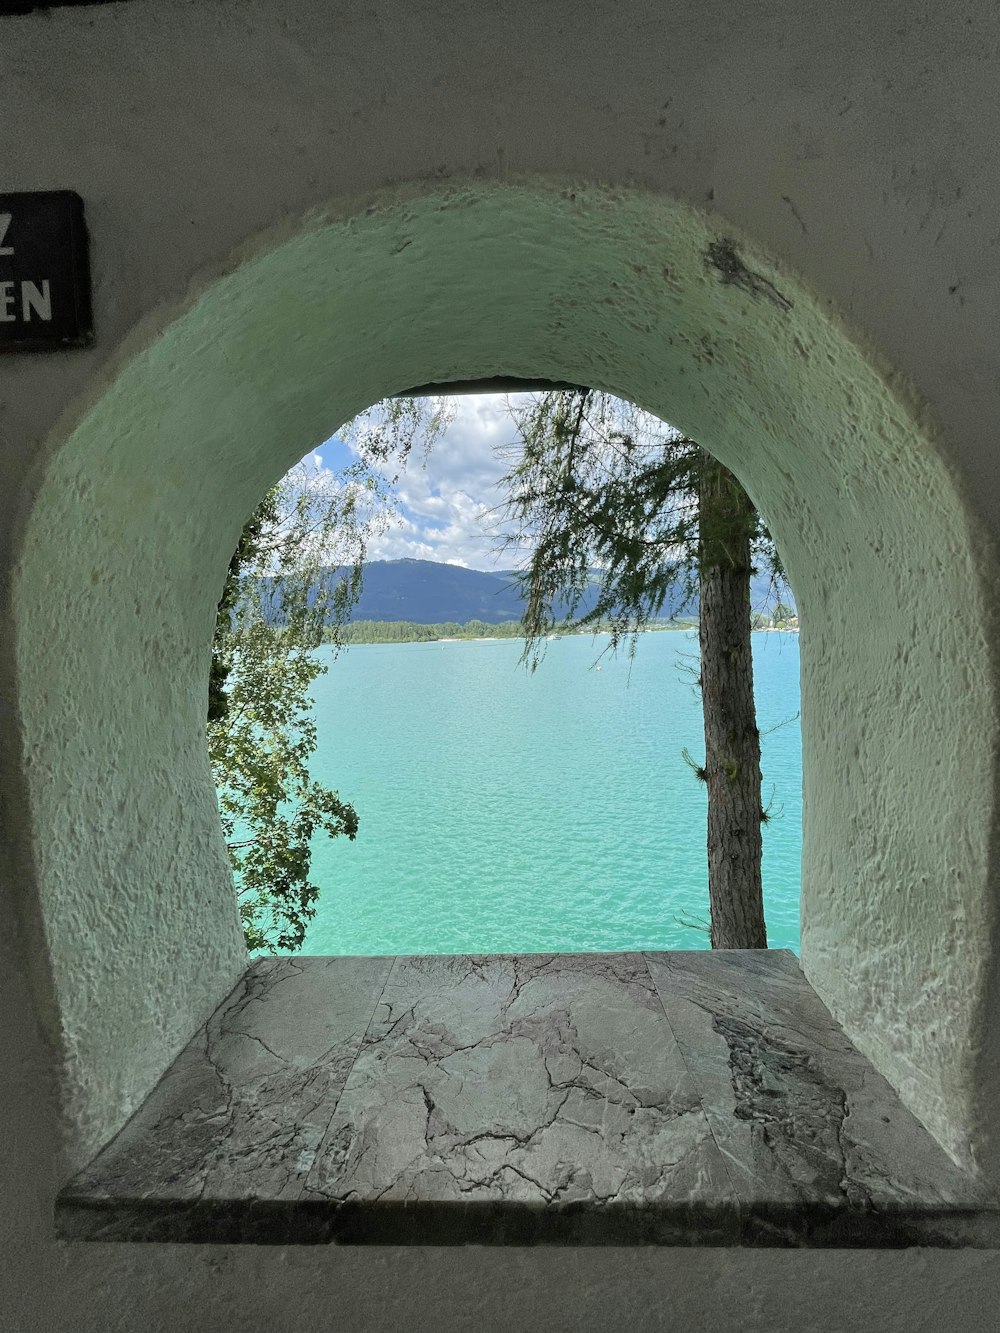 a view of a lake through a stone archway